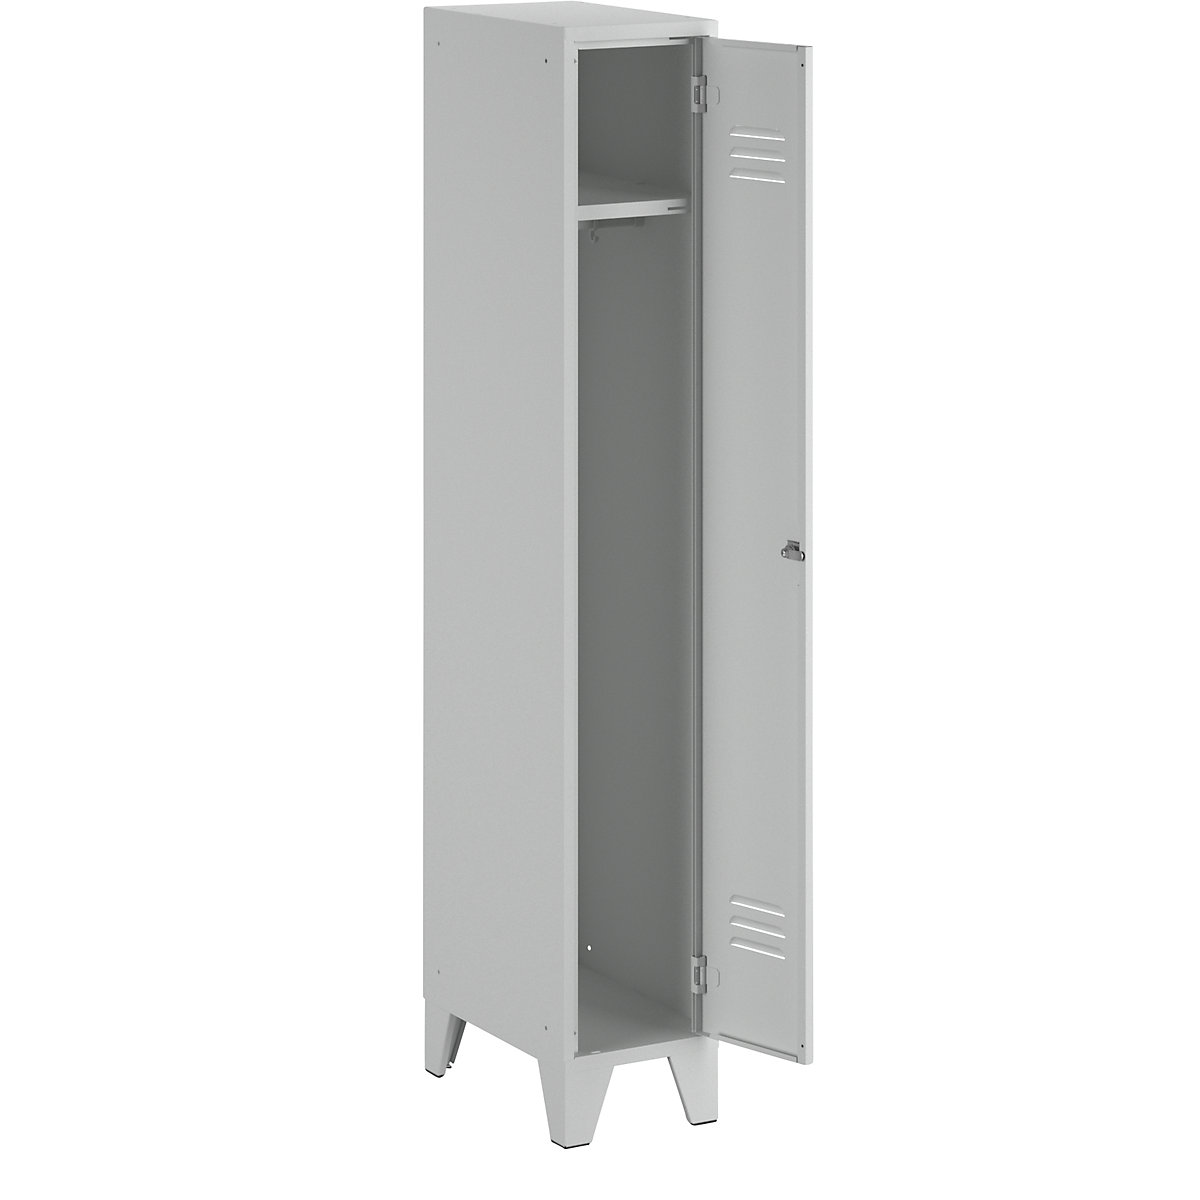 Steel locker with stud feet – Wolf, full height compartments, solid doors, compartment width 300 mm, 1 compartment, light grey-34